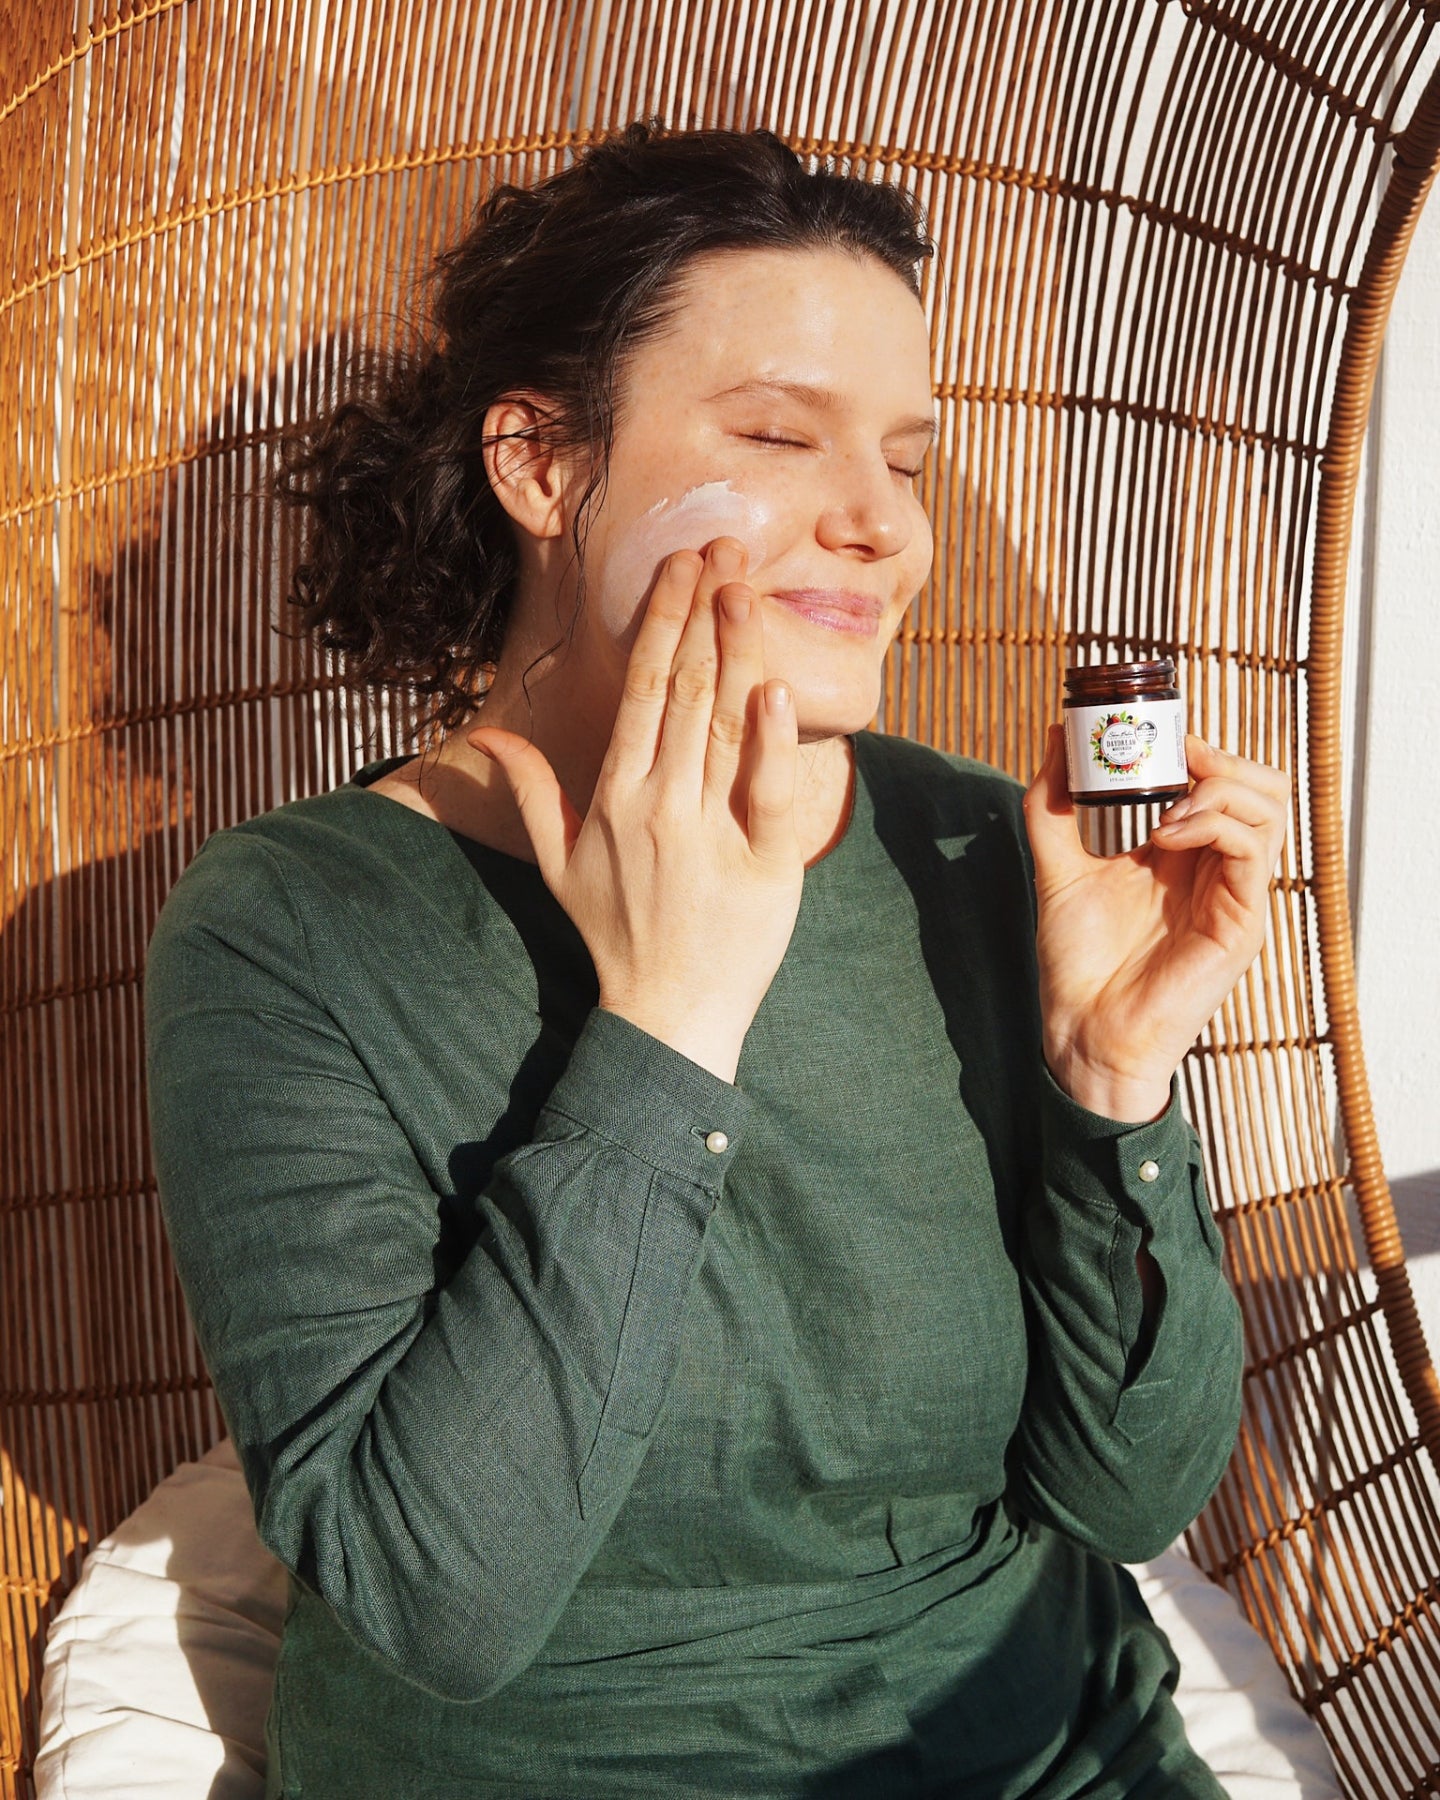 A smiling woman applies Daydream Mineral Sunscreen to her face in the sun.